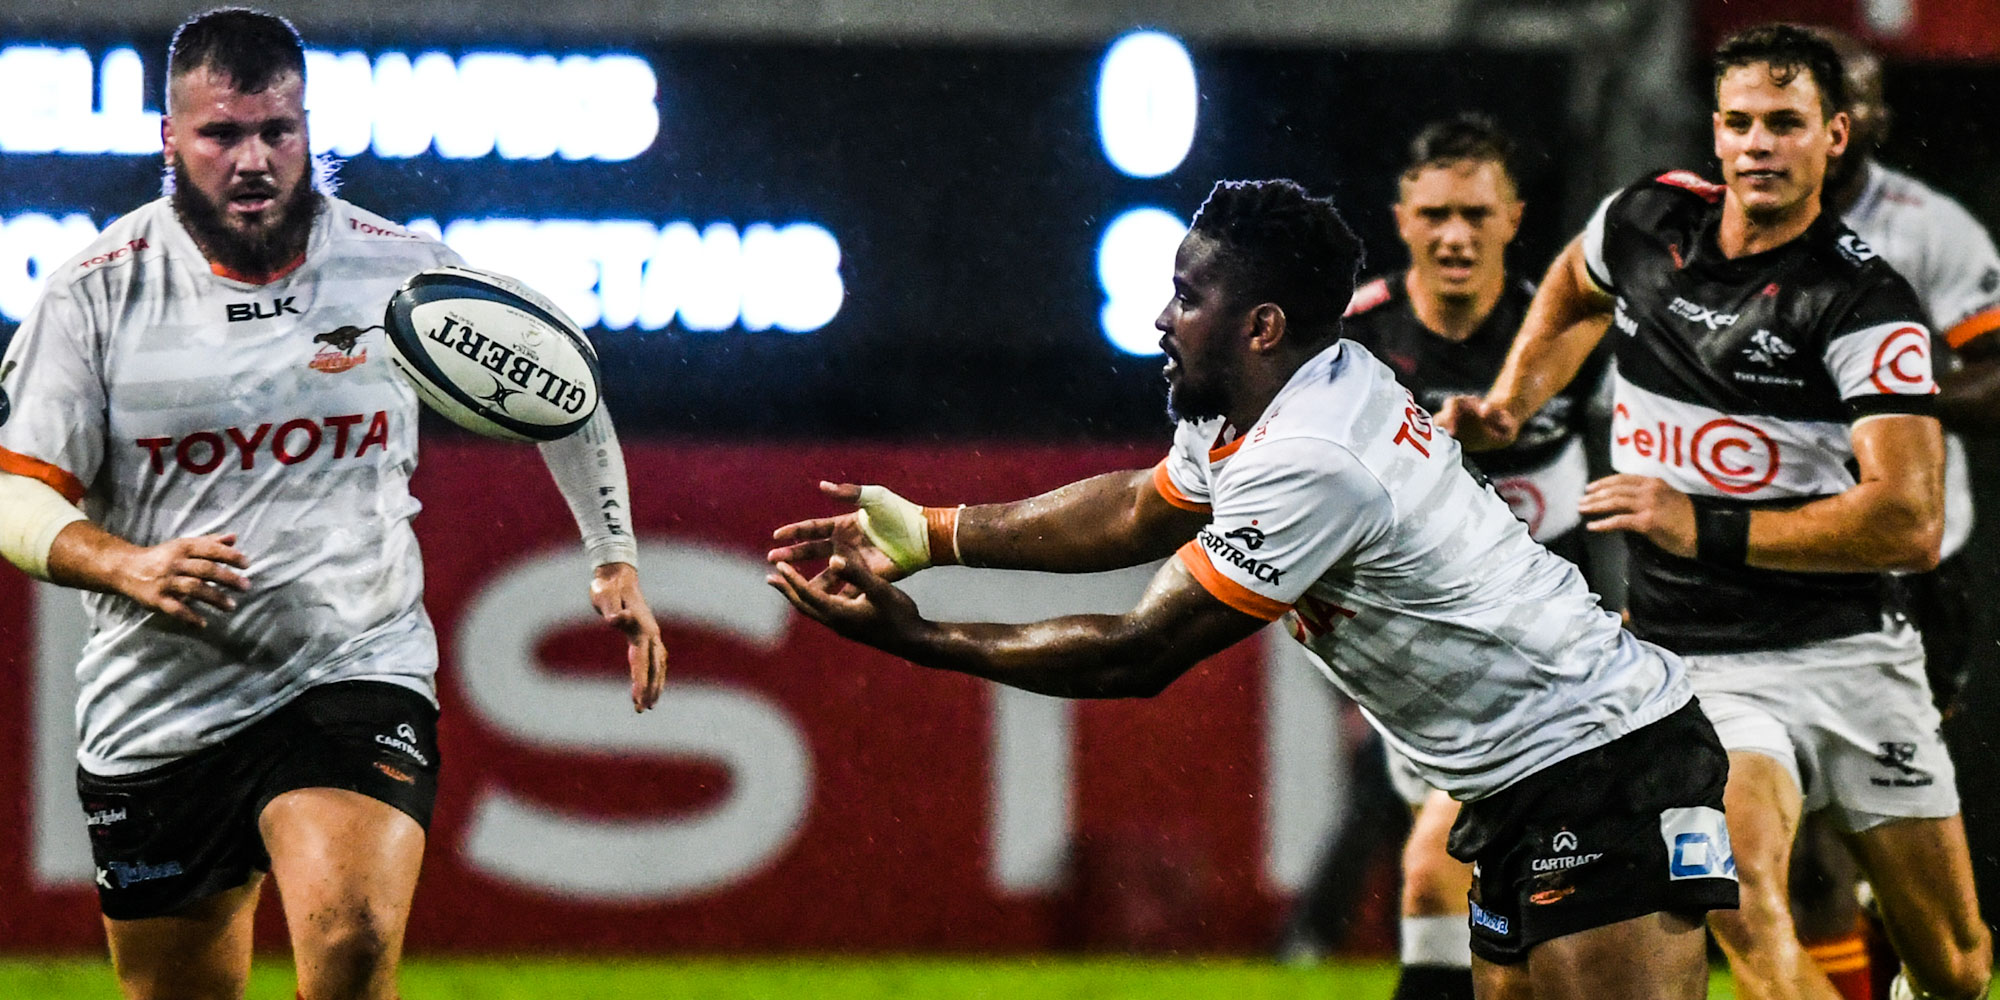 The Toyota Cheetahs' Siya Masuku in action against the Cell C Sharks.